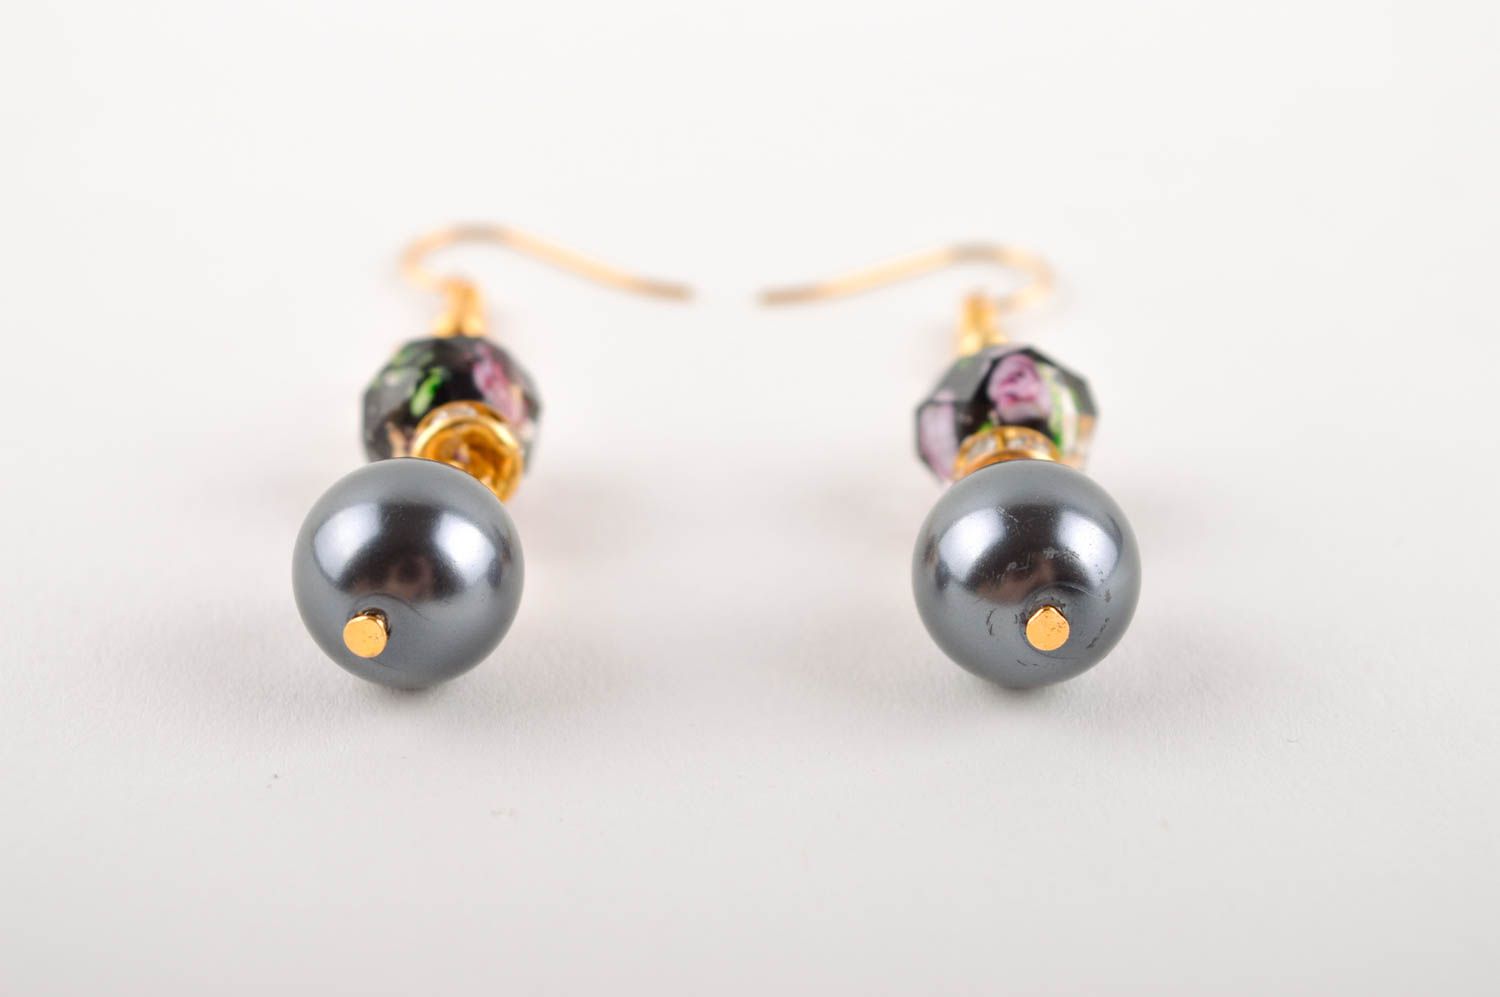 Handmade earrings with artificial pearls designer accessories fashion jewelry photo 4